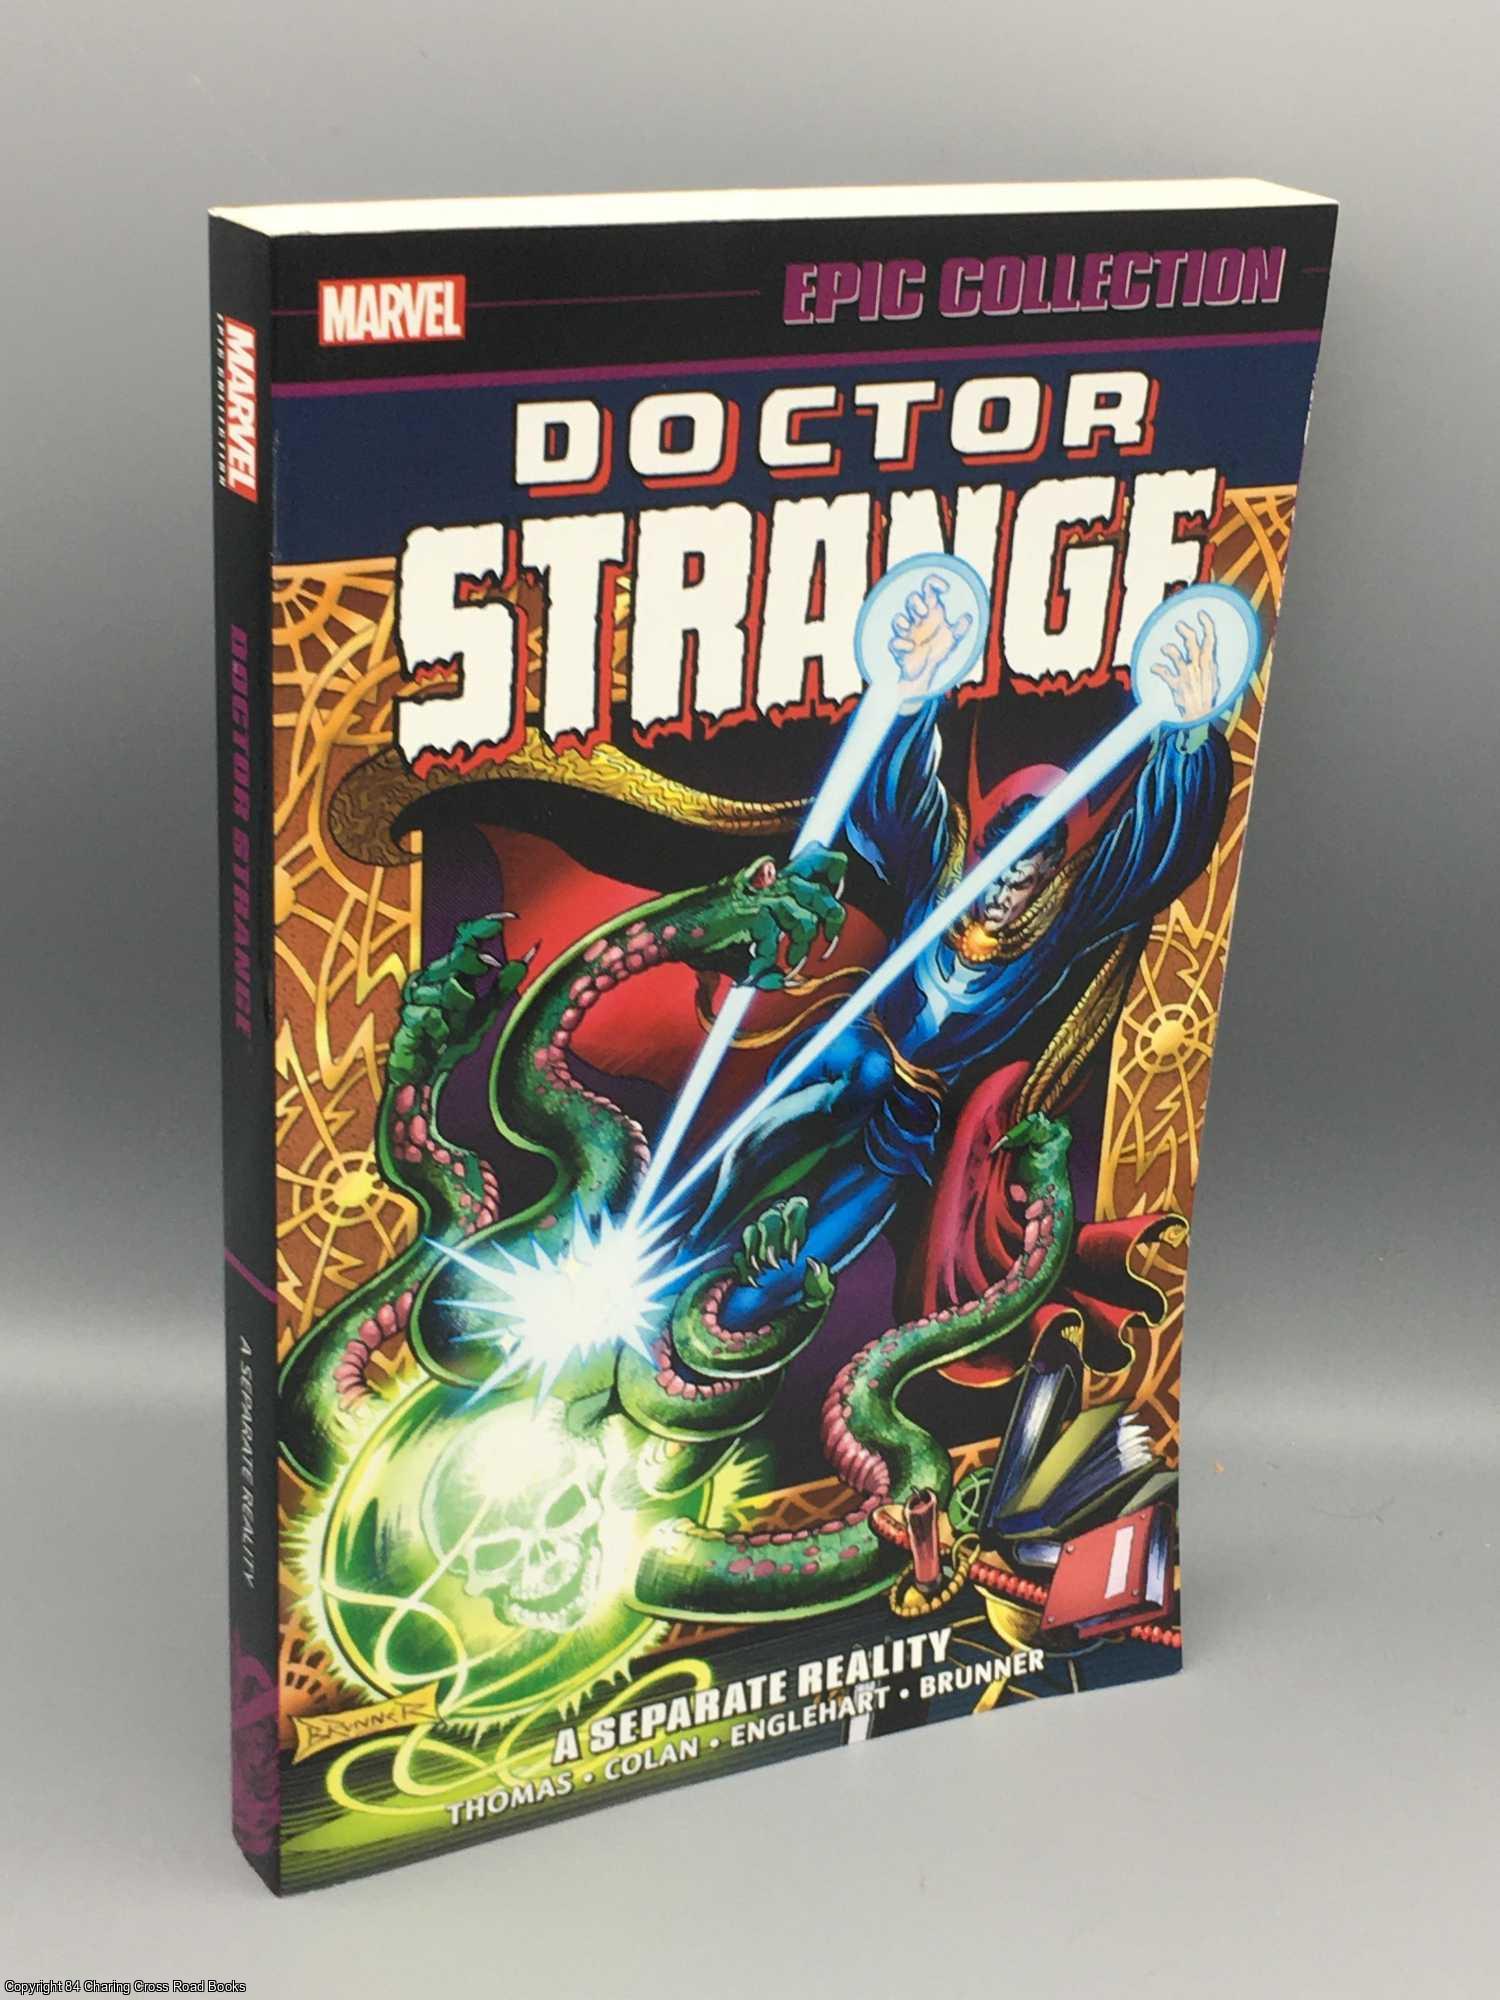 Thomas; Colan; Englehart; Brunner - Doctor Strange Epic Collection: A Separate Reality